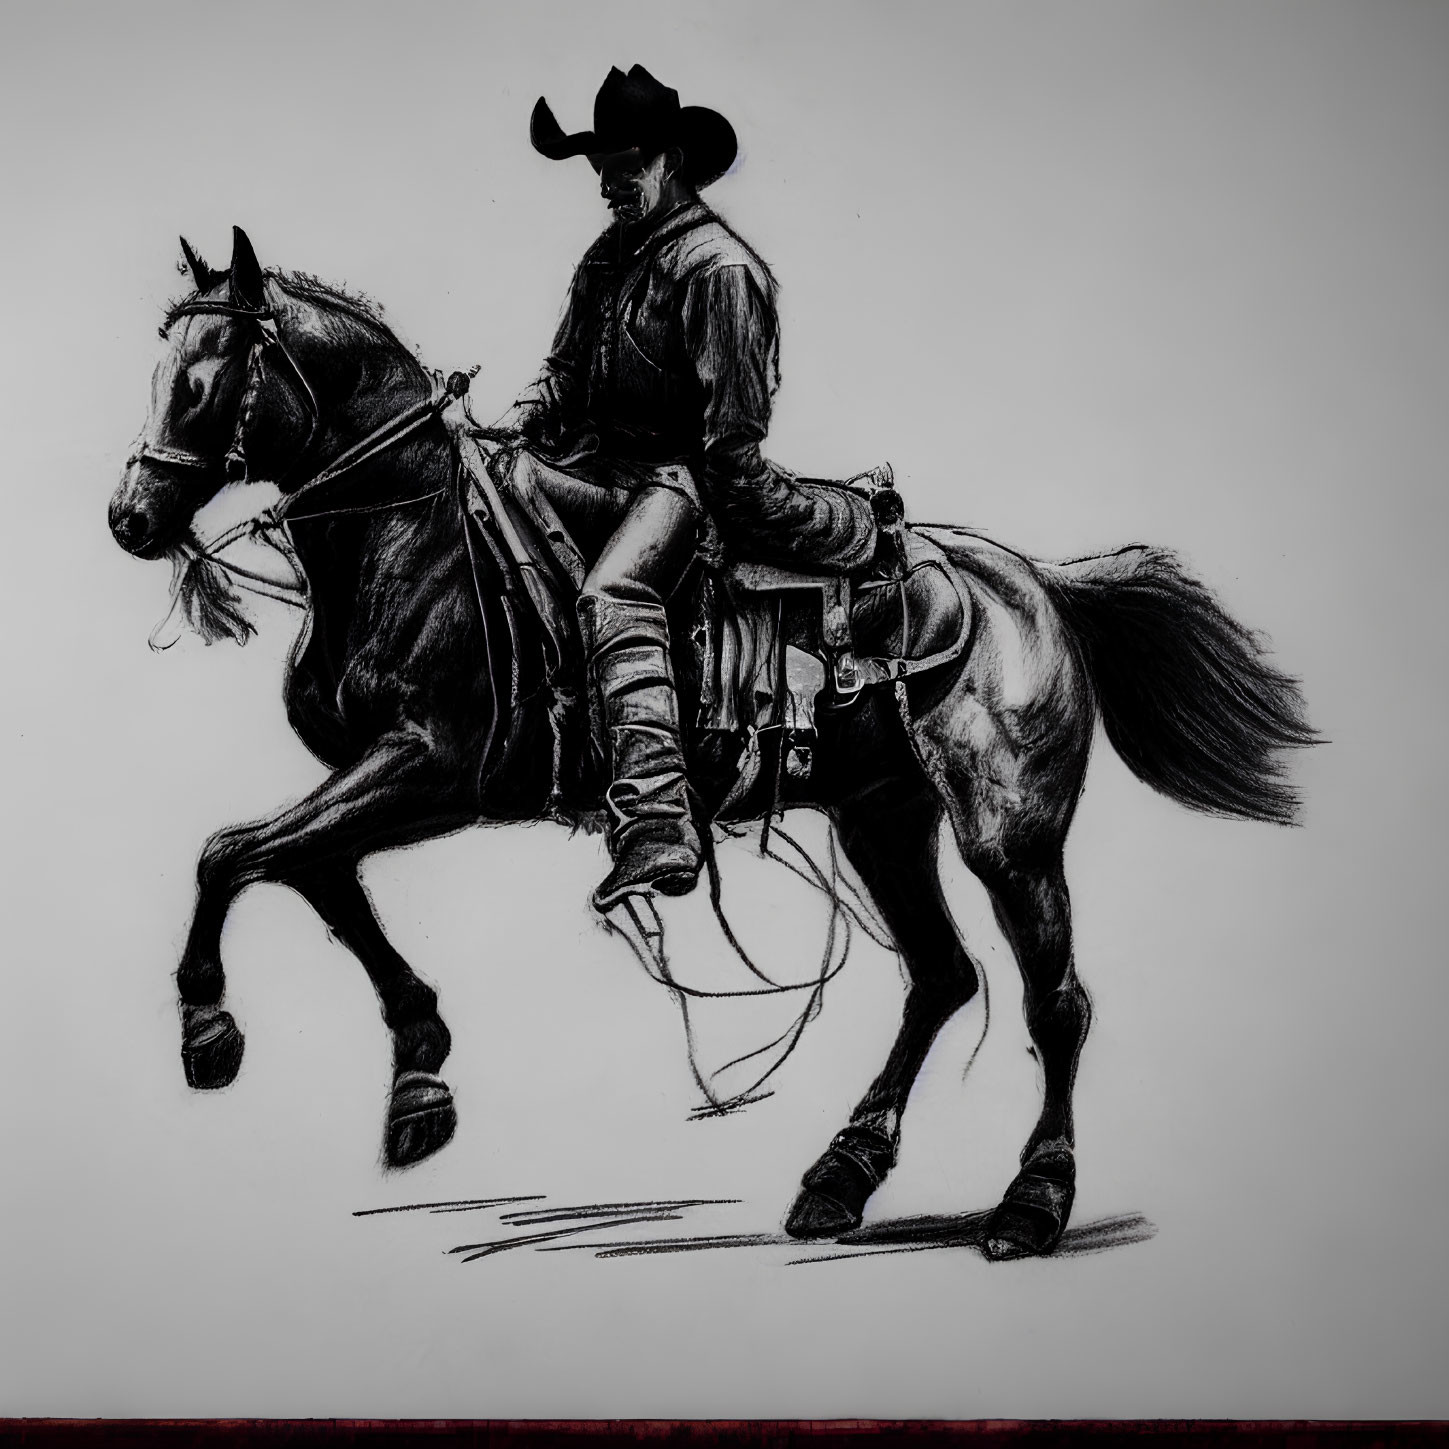 Detailed pencil sketch of a cowboy on a horse in motion with dynamic shading and lines